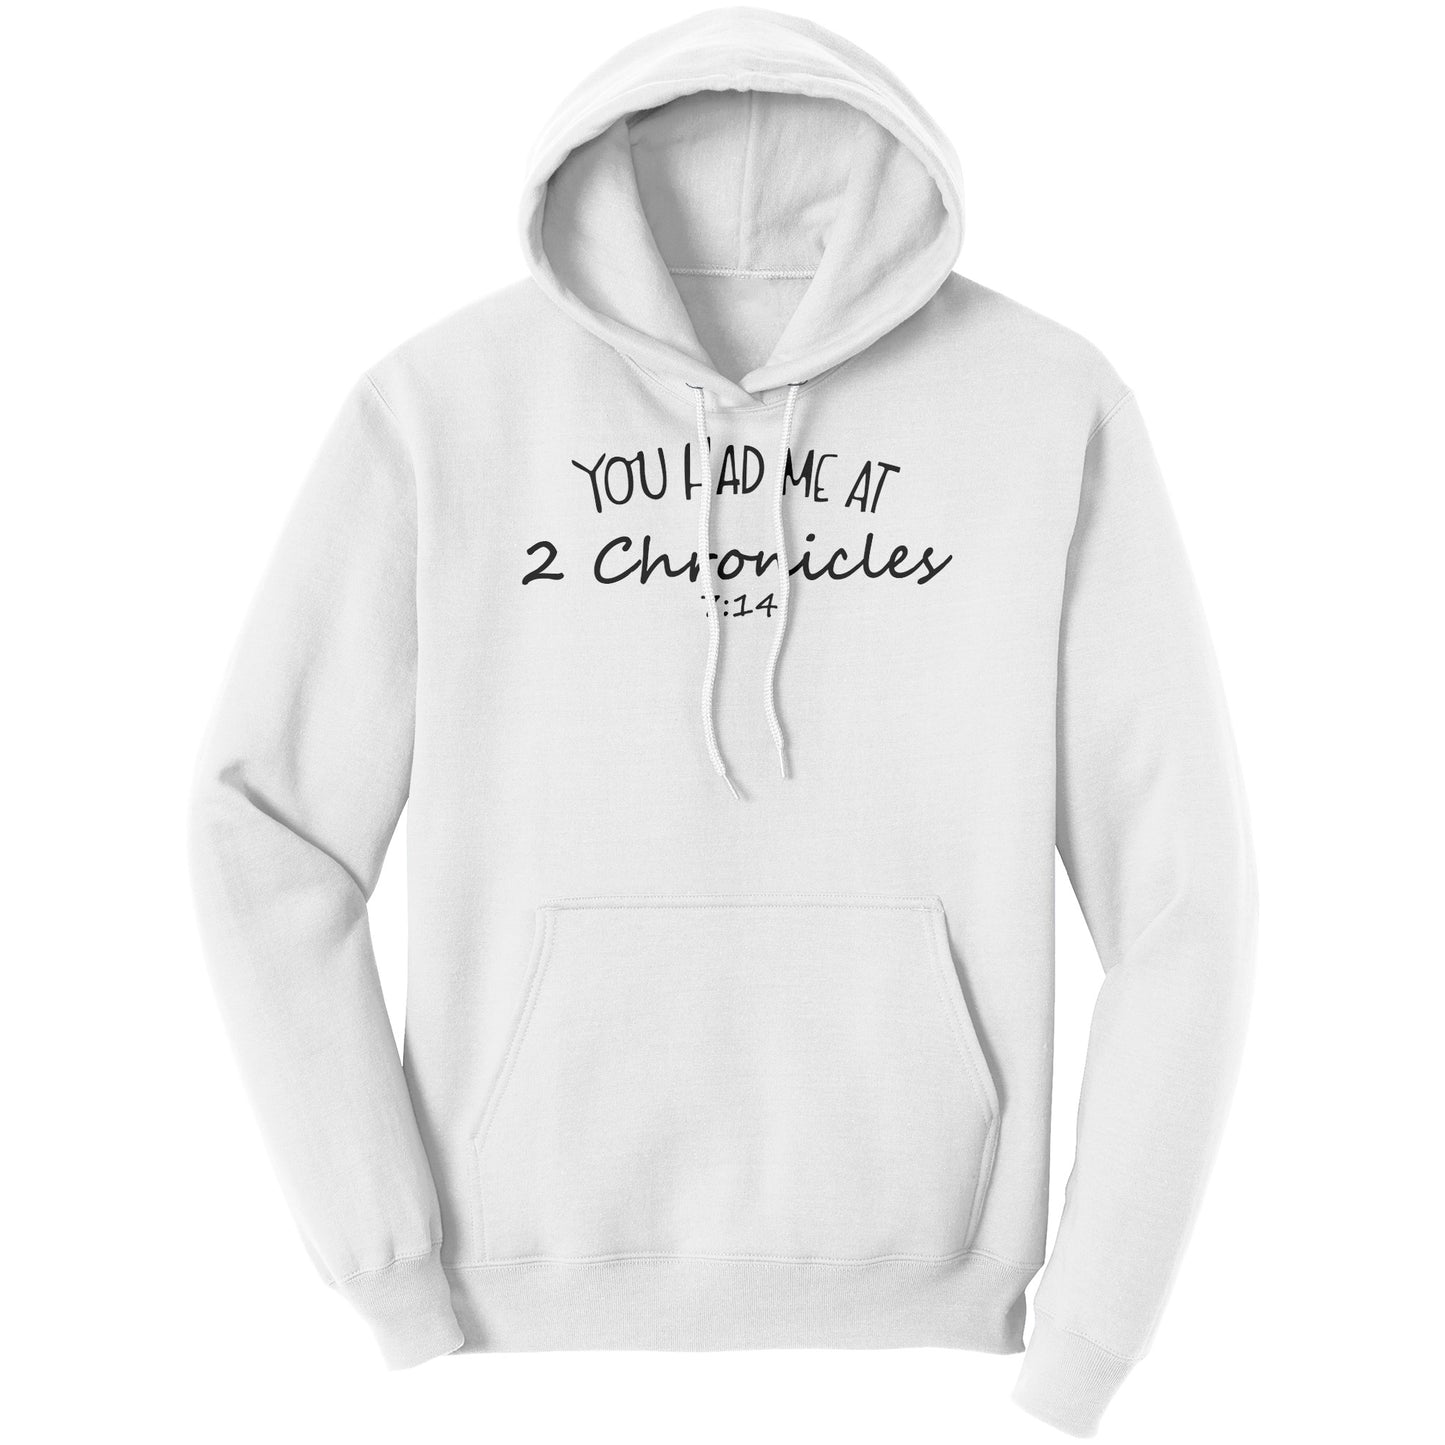 You Had Me At 2 Chronicles 7:14 Hoodie Part 1